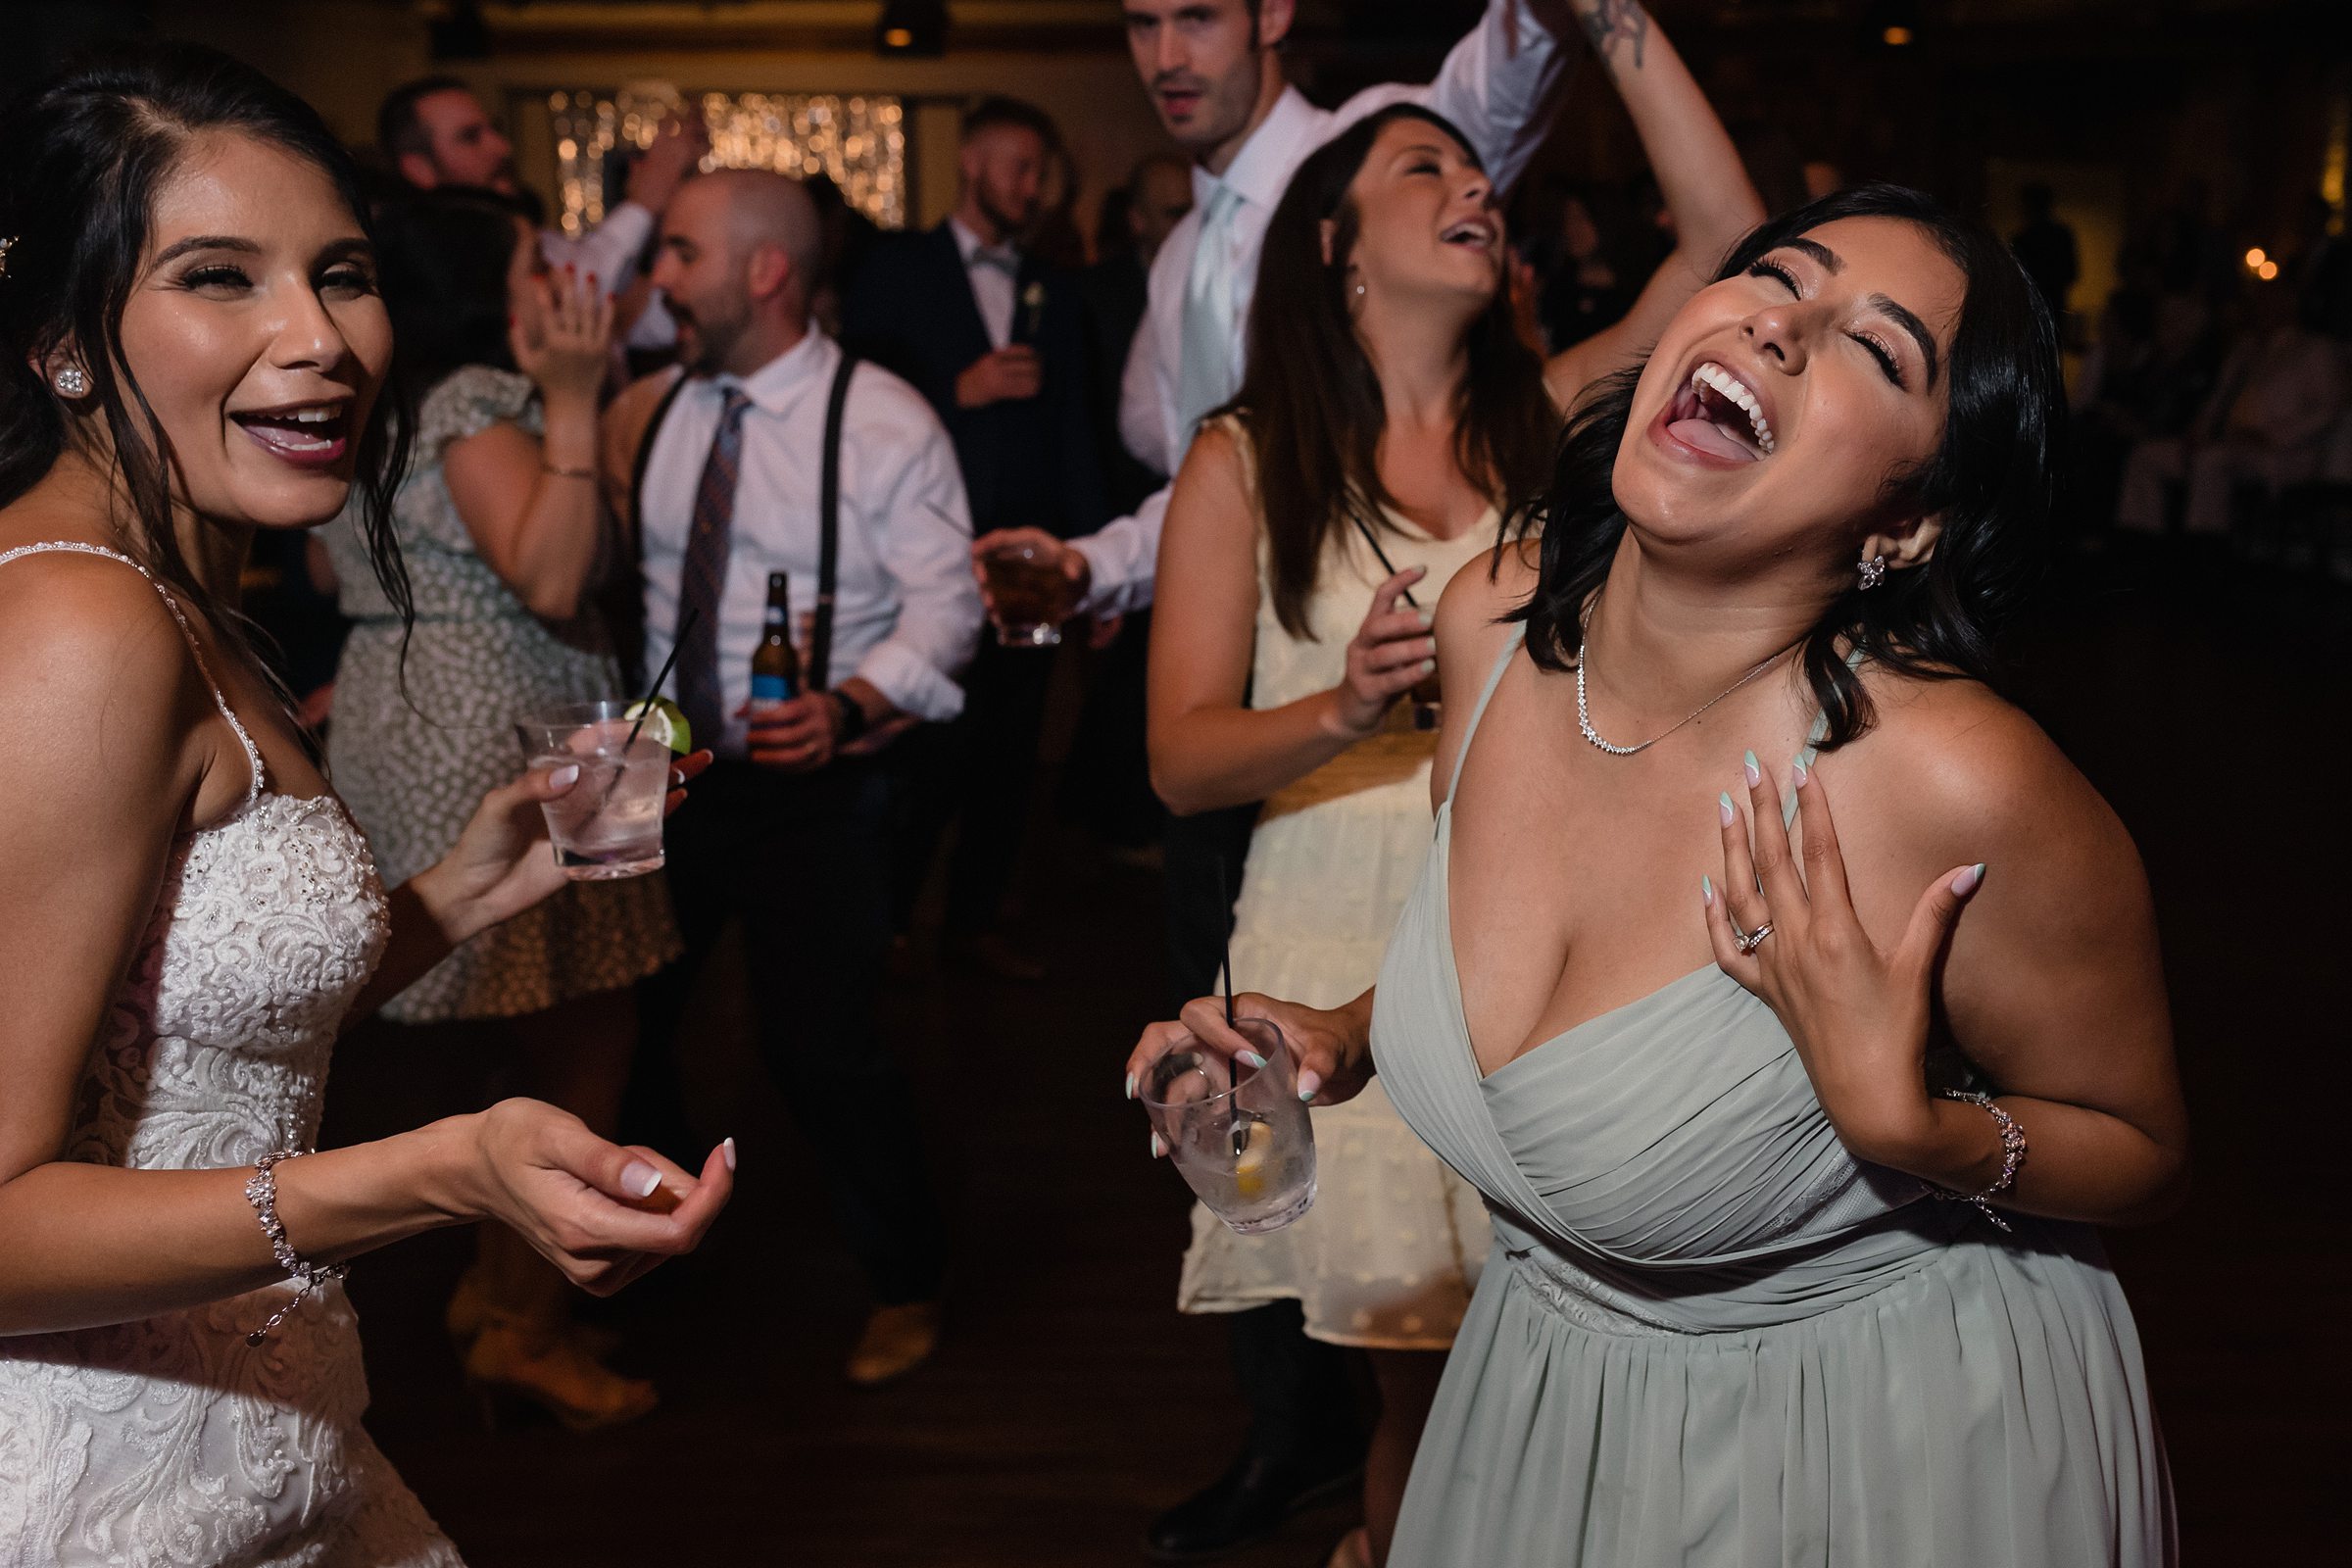 Family and friends dance during a wedding at the Fisherman's Inn in Elburn, Illinois.